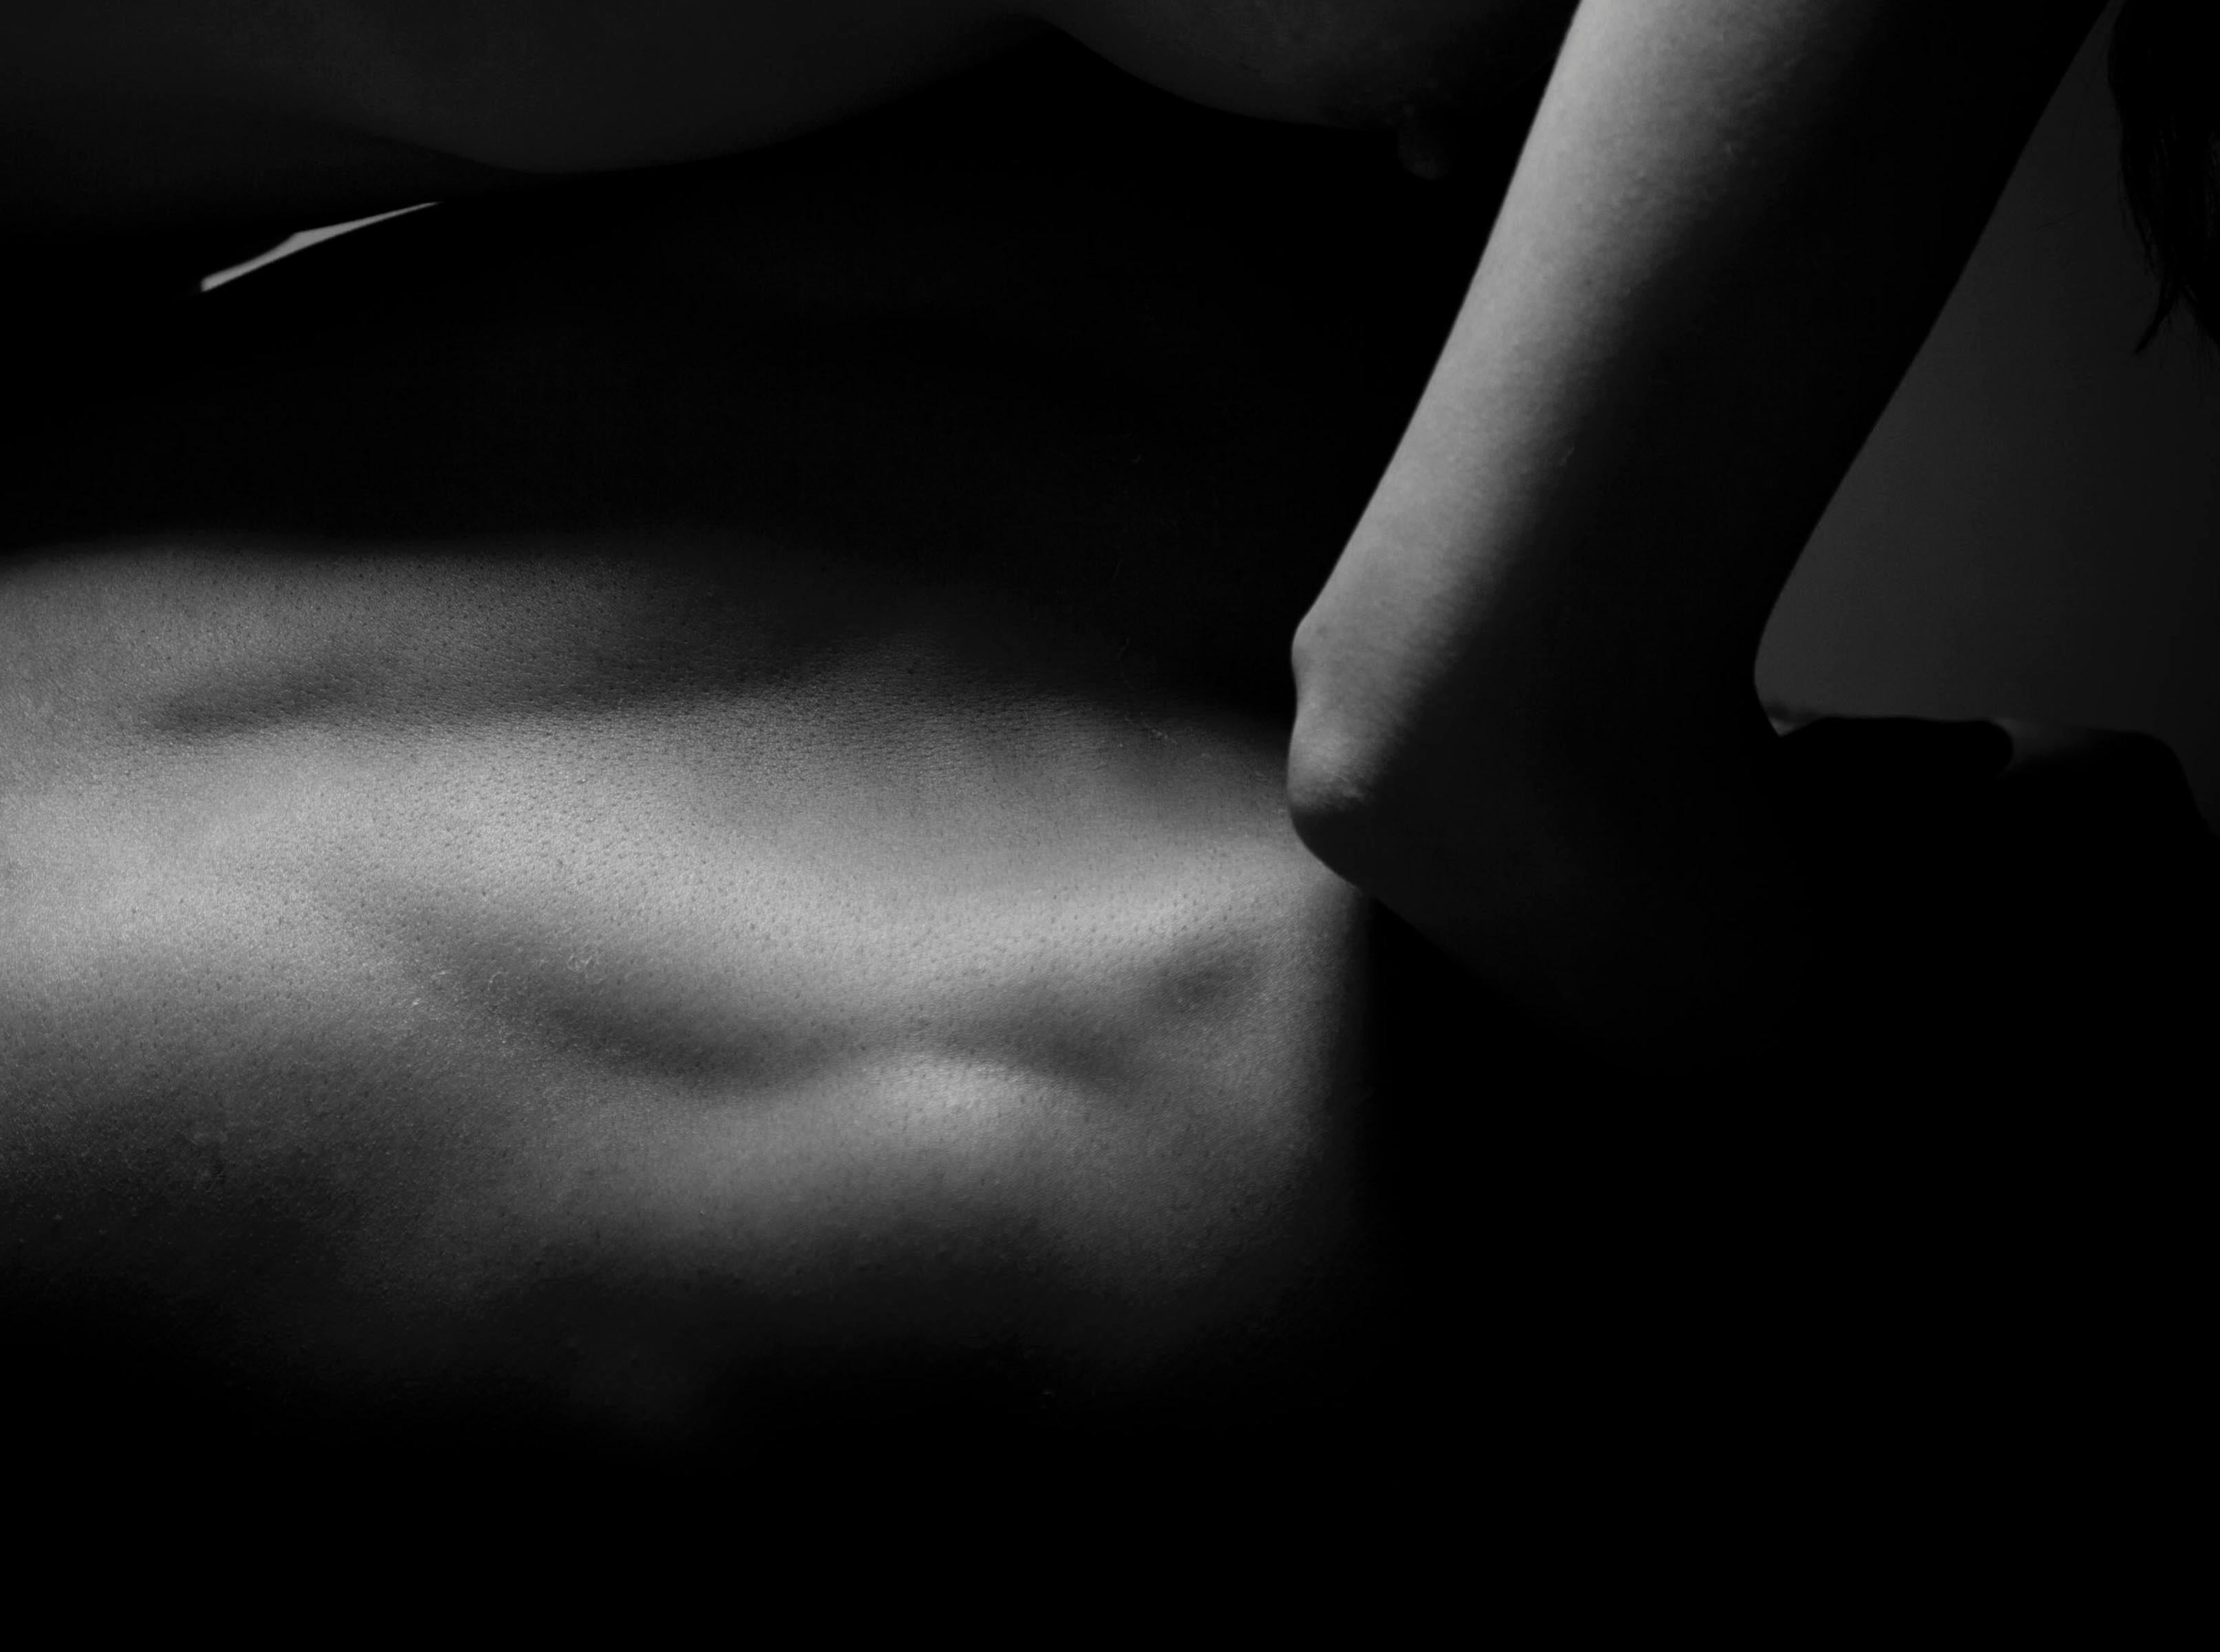 Untitled From the 'Serendipia' series, Black and White nude photograph - Contemporary Photograph by Mauricio Velez